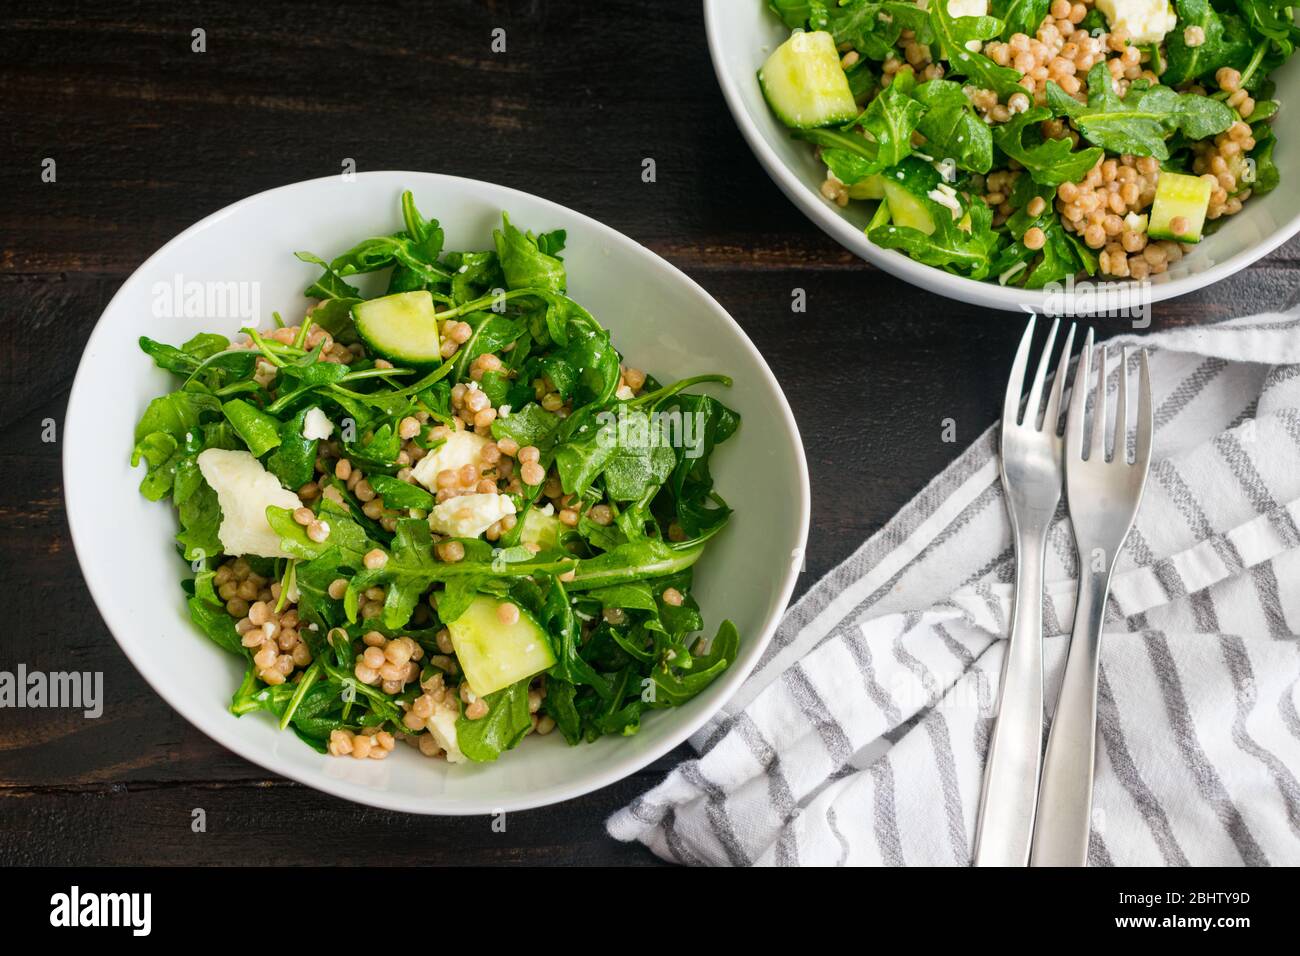 Lemony Arugula Salad with Couscous, Cucumbers, and Feta: Arugula salad with chunks of cucumber, feta cheese crumbles, and whole wheat pearl couscous Stock Photo